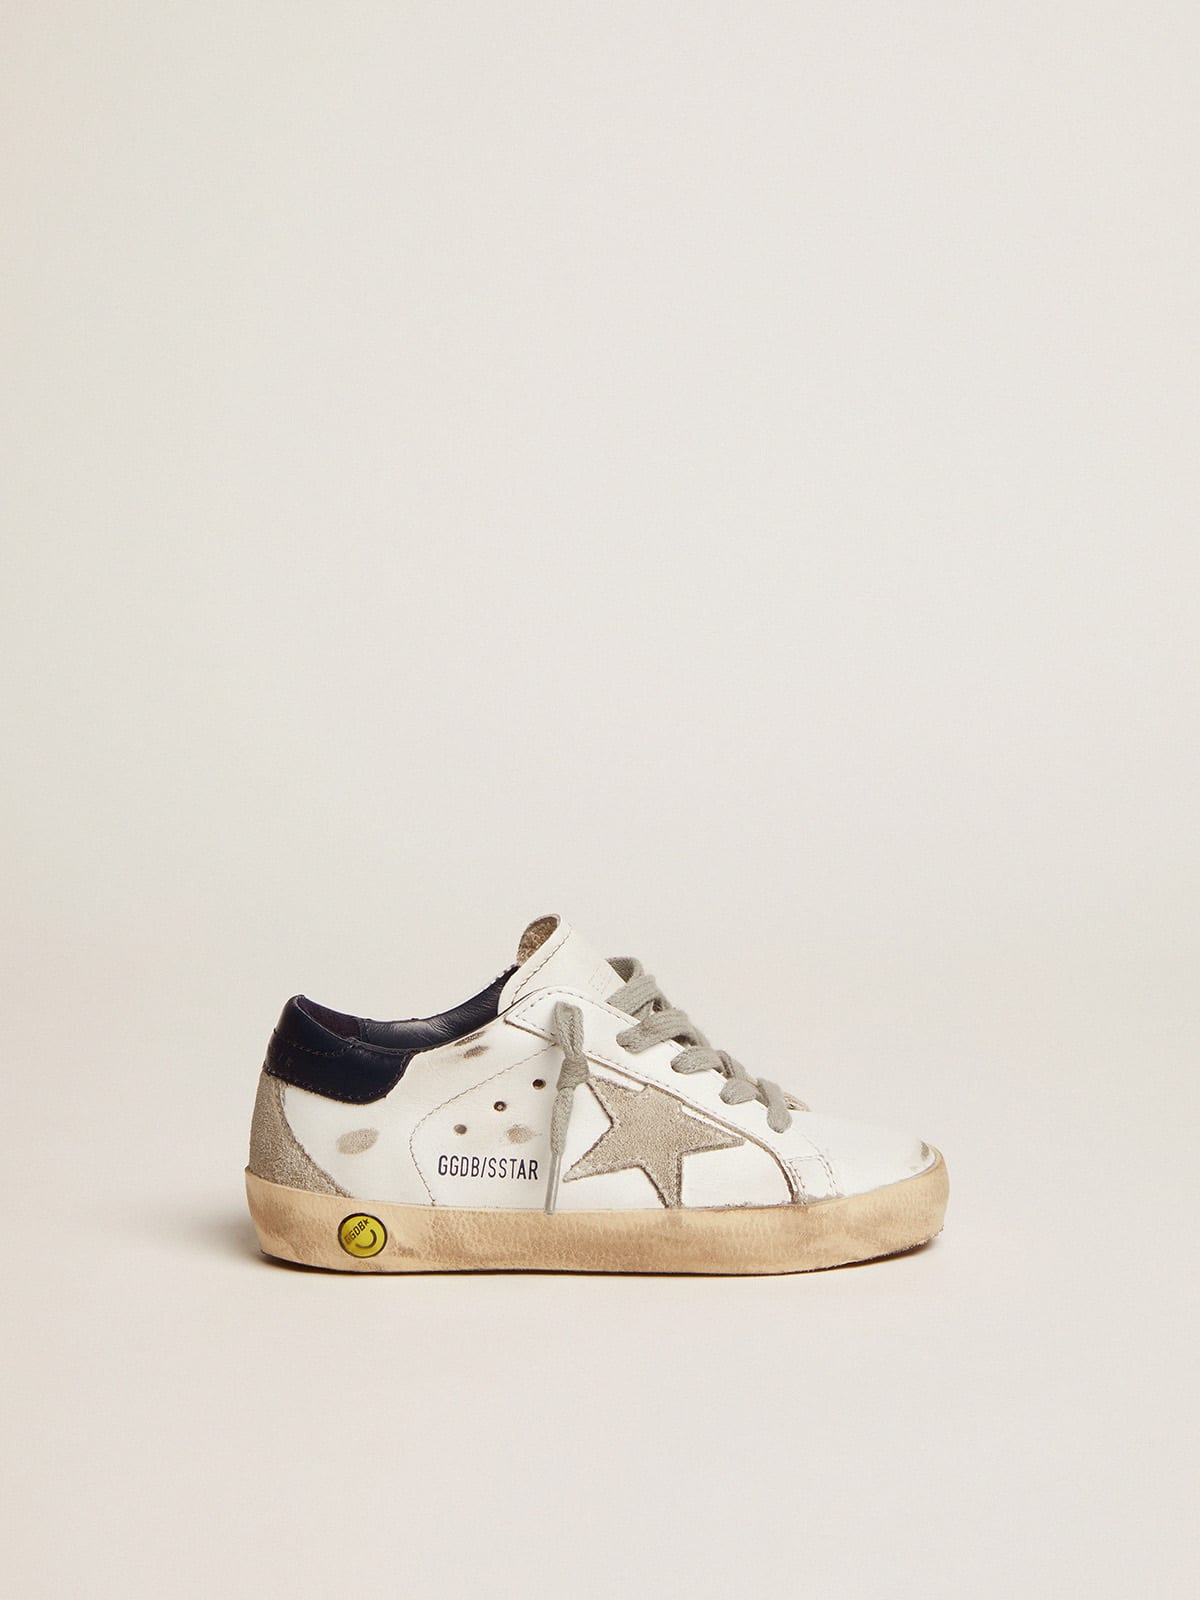 Junior Super-Star with gray suede star and blue heel tab | Golden Goose